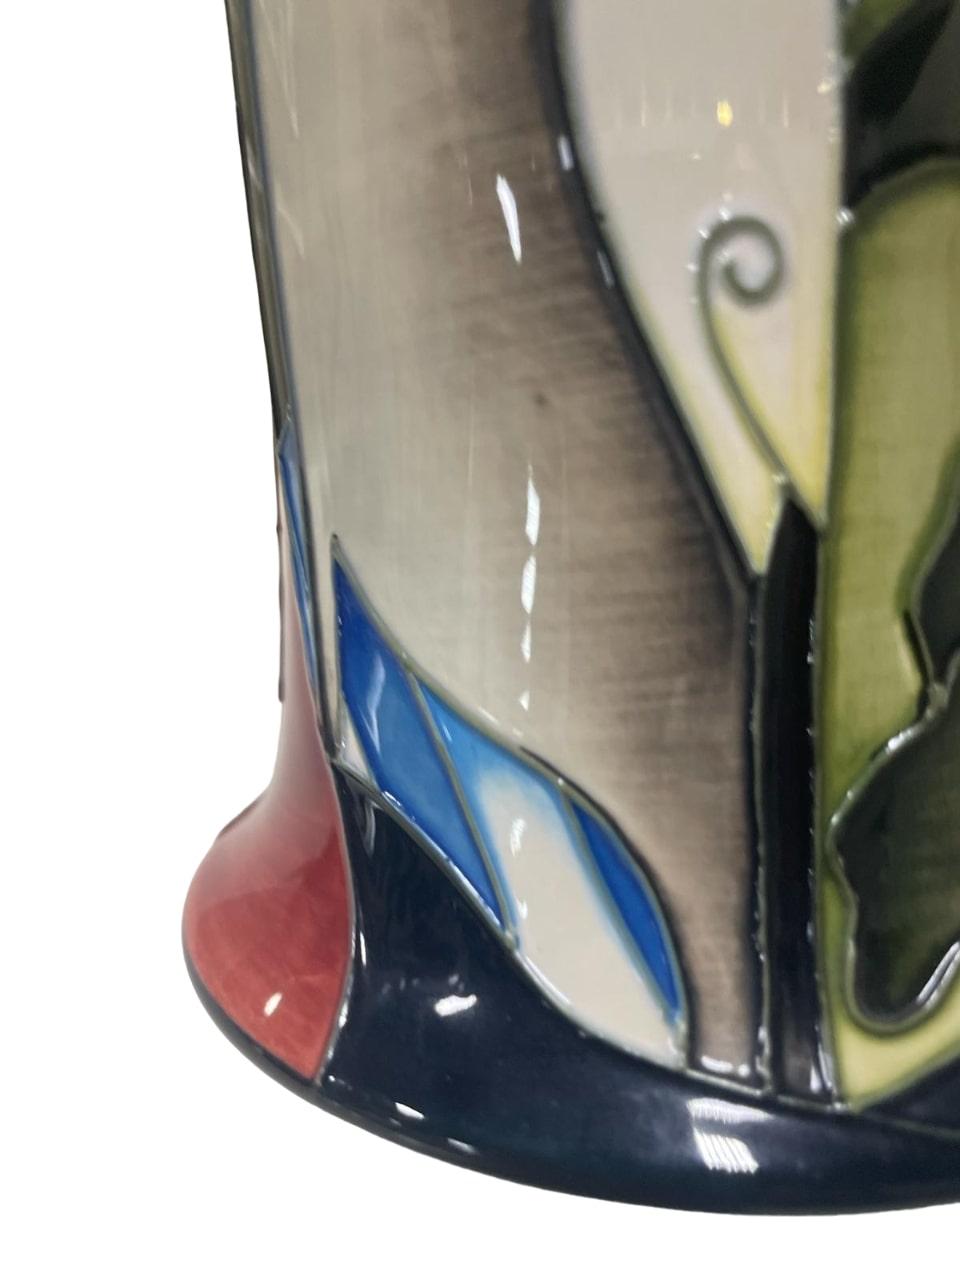 LIMITED EDITION MOORCROFT Wapiti vase by Emma Bossons dated 2012 31/35 For Sale 1